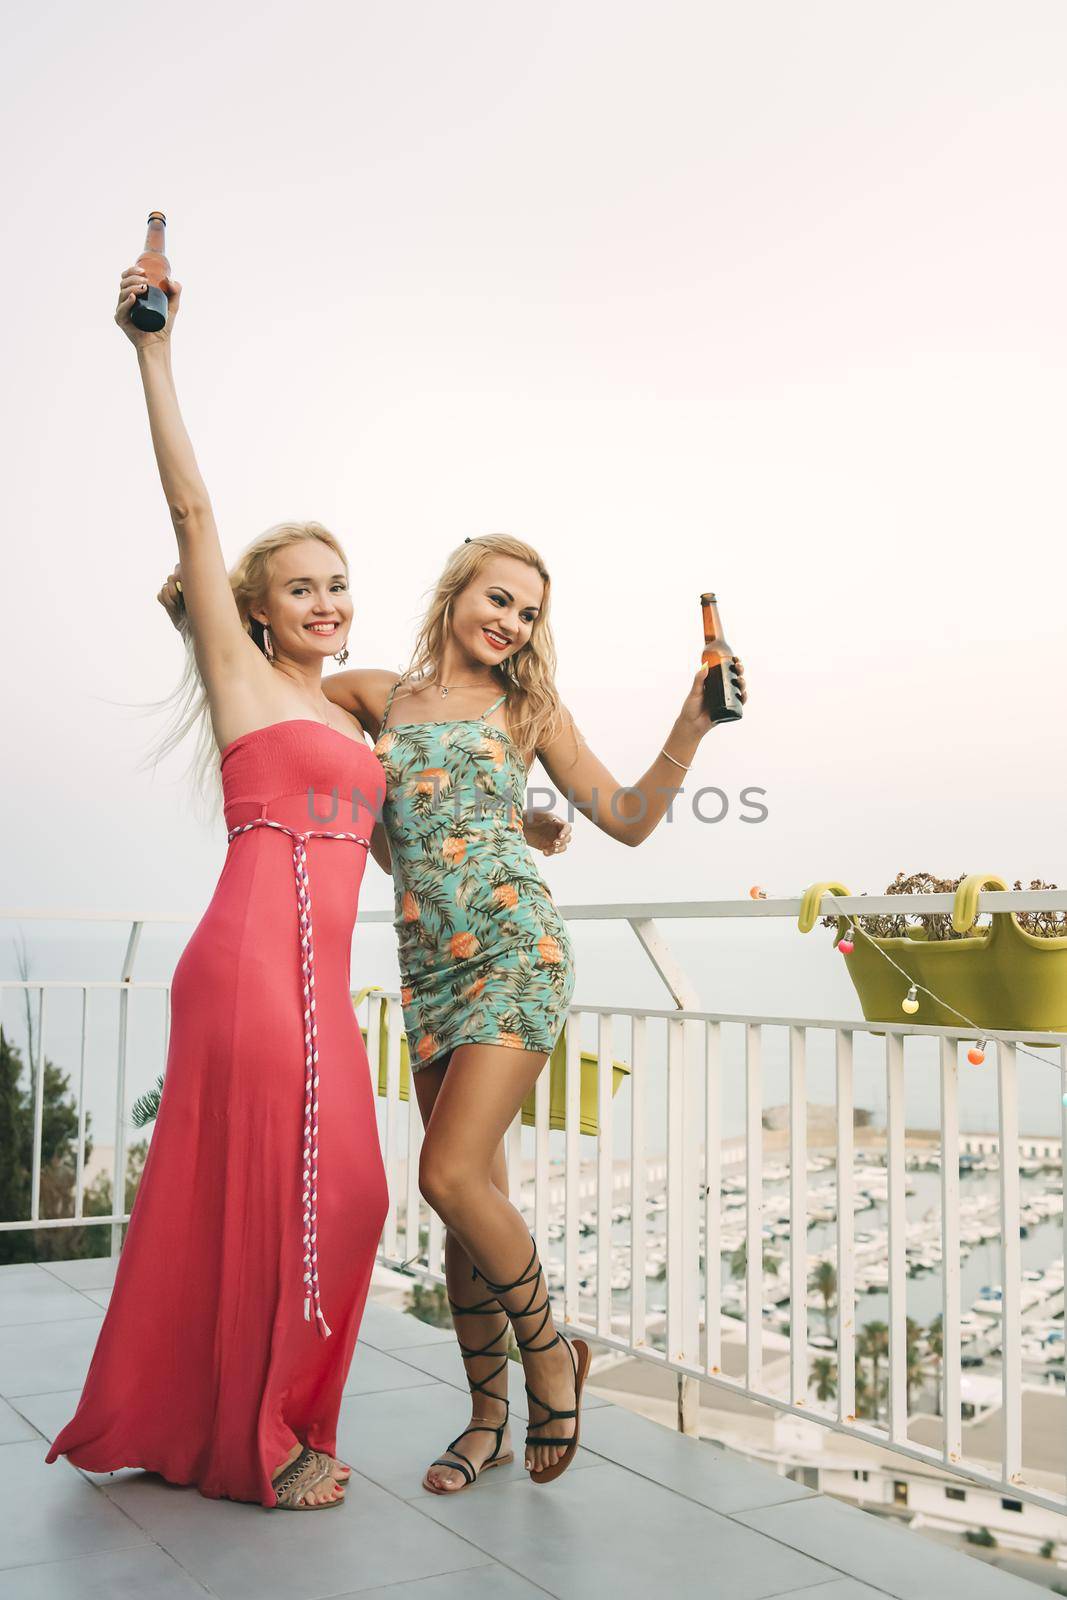 carefree young girls with beers dancing and having fun at a private party on the outdoor terrace in front of the port, leisure happiness and friendship concept, vertical photo with copy space for text